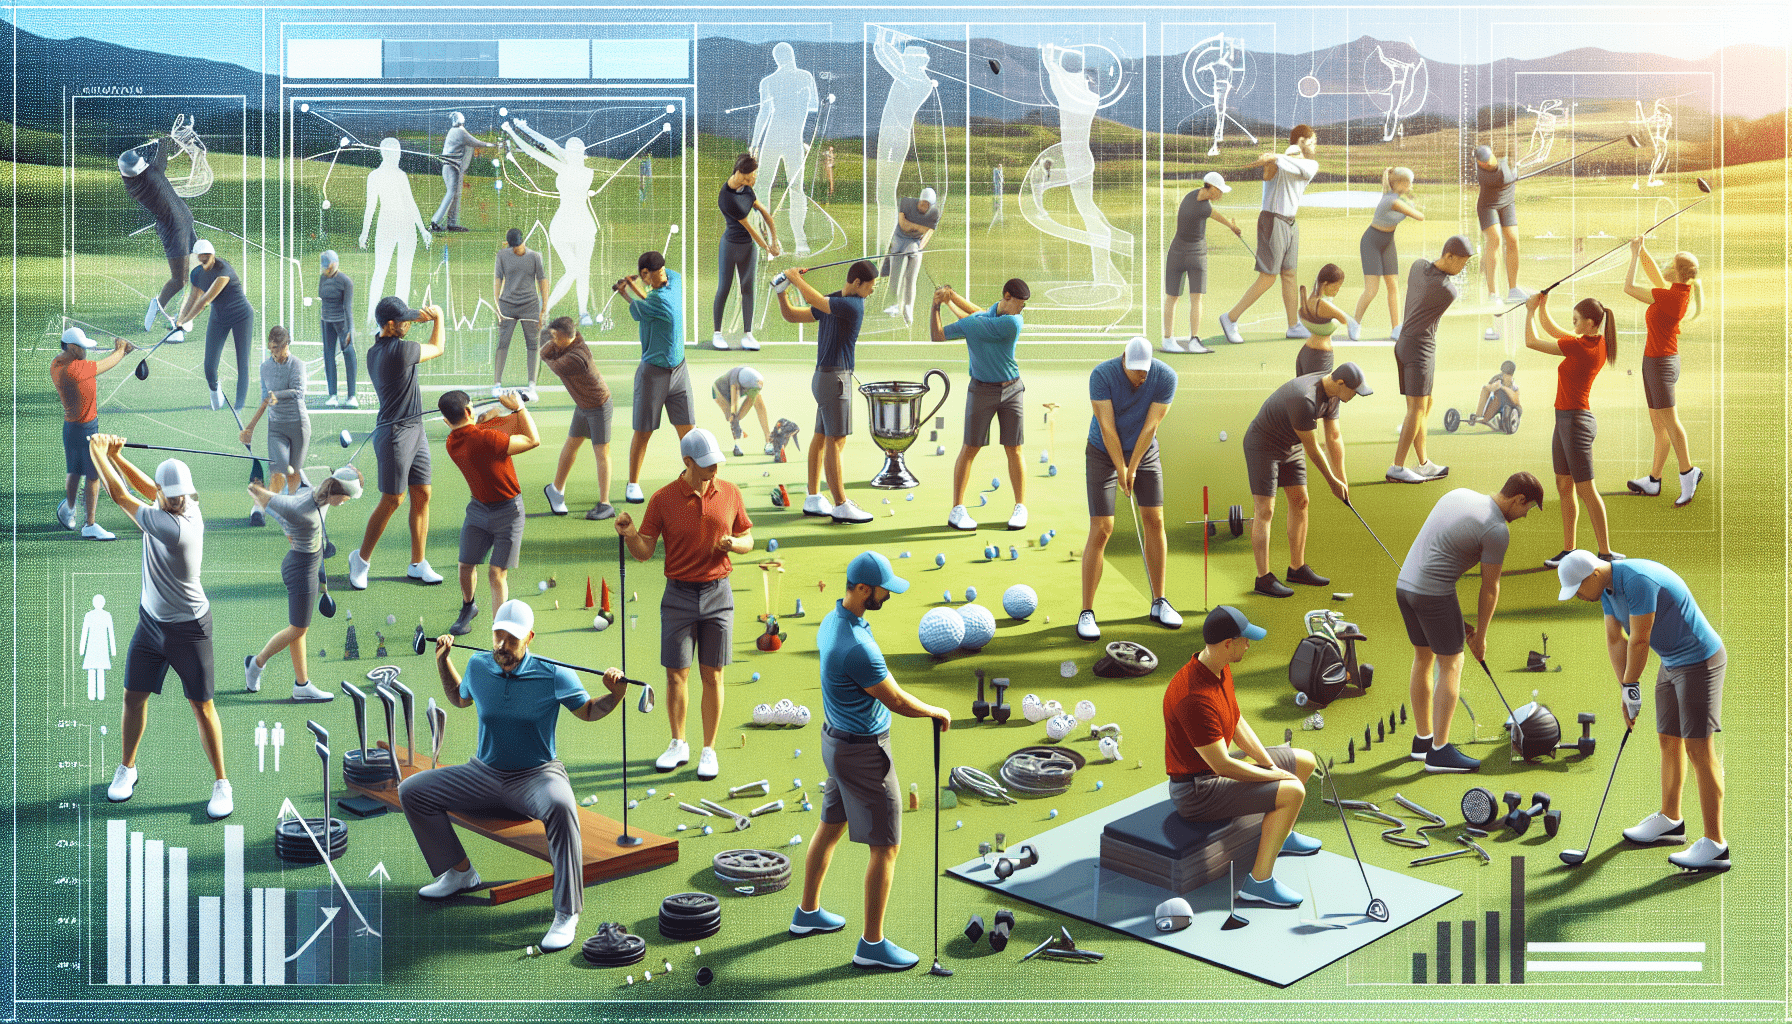 Improve Your Golf Game with an Effective Off-Season Training Program